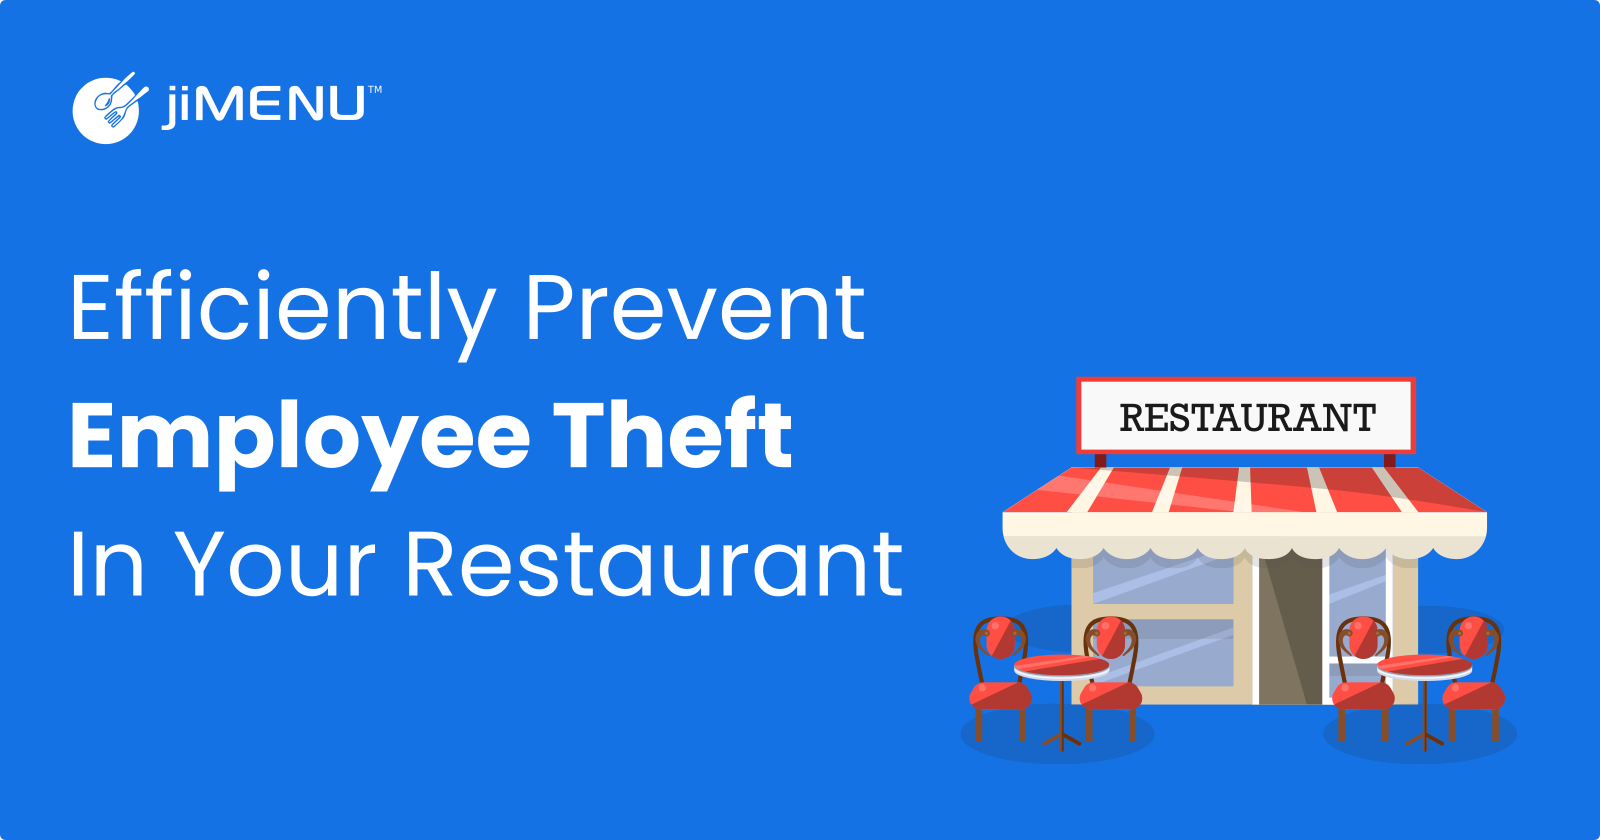 What Are The Strategies That Help You Prevent Employee Theft In Restaurant?